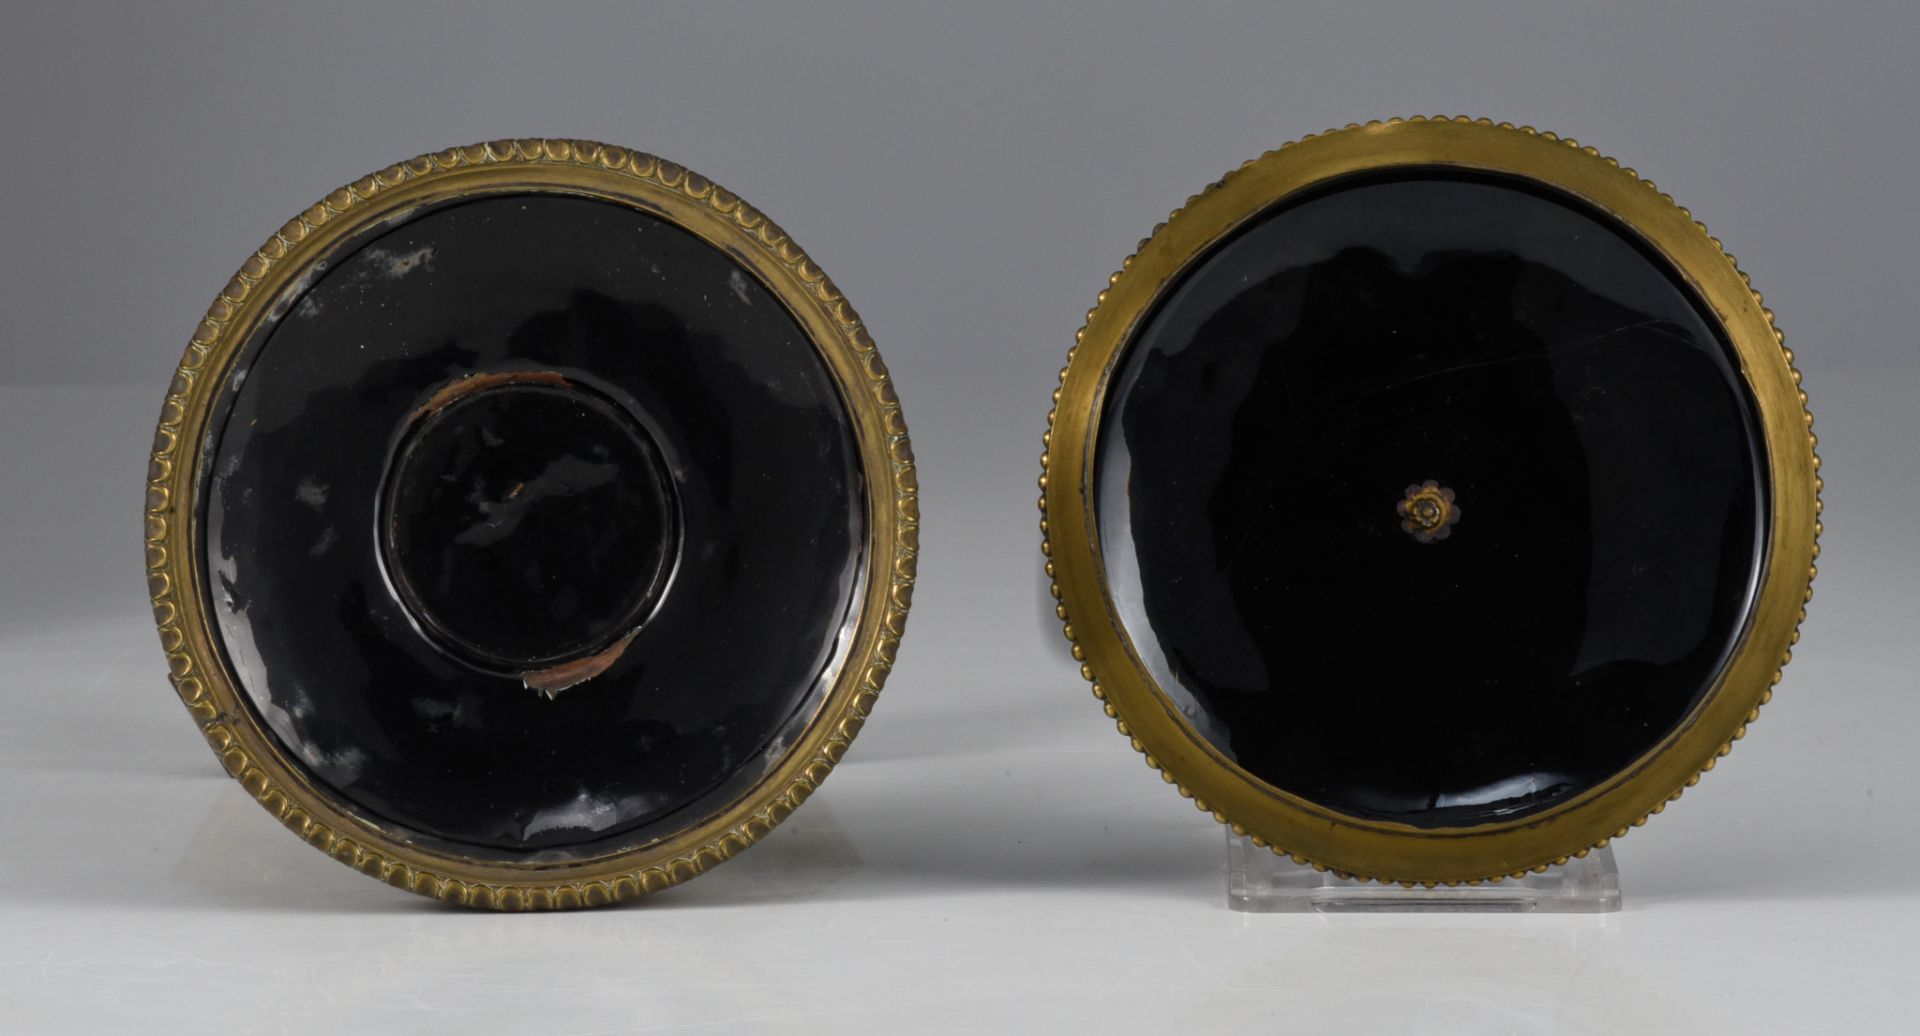 A Limoges enamel box with cover and a tazza with cover, Napoleon III period, H 8 - 23 cm - Image 15 of 16